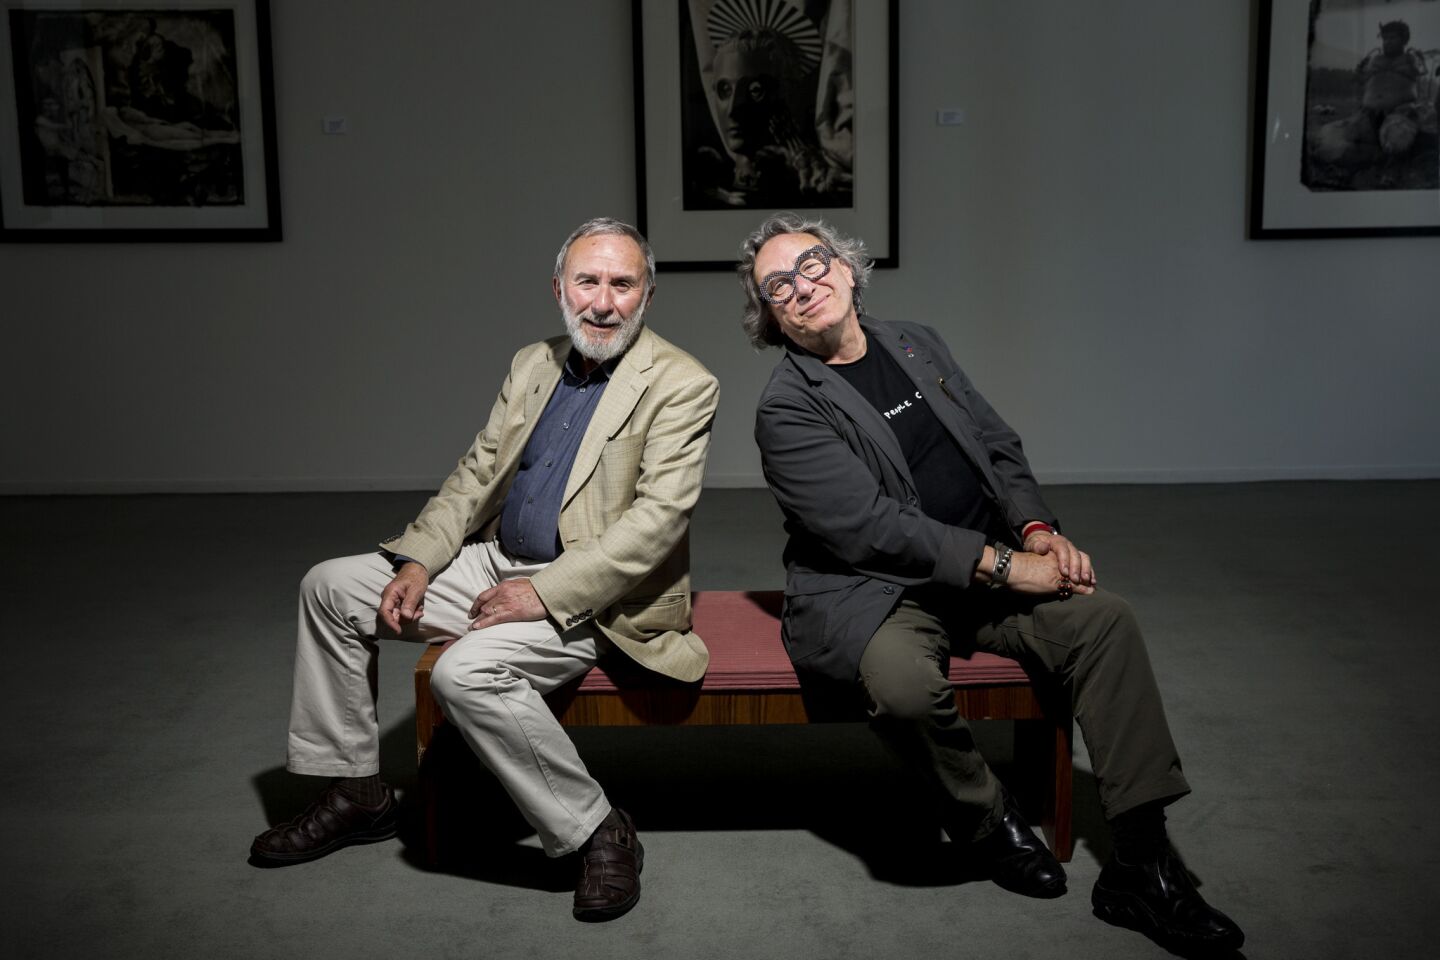 Arts and culture in pictures by The Times | Jerome and Joel-Peter Witkin